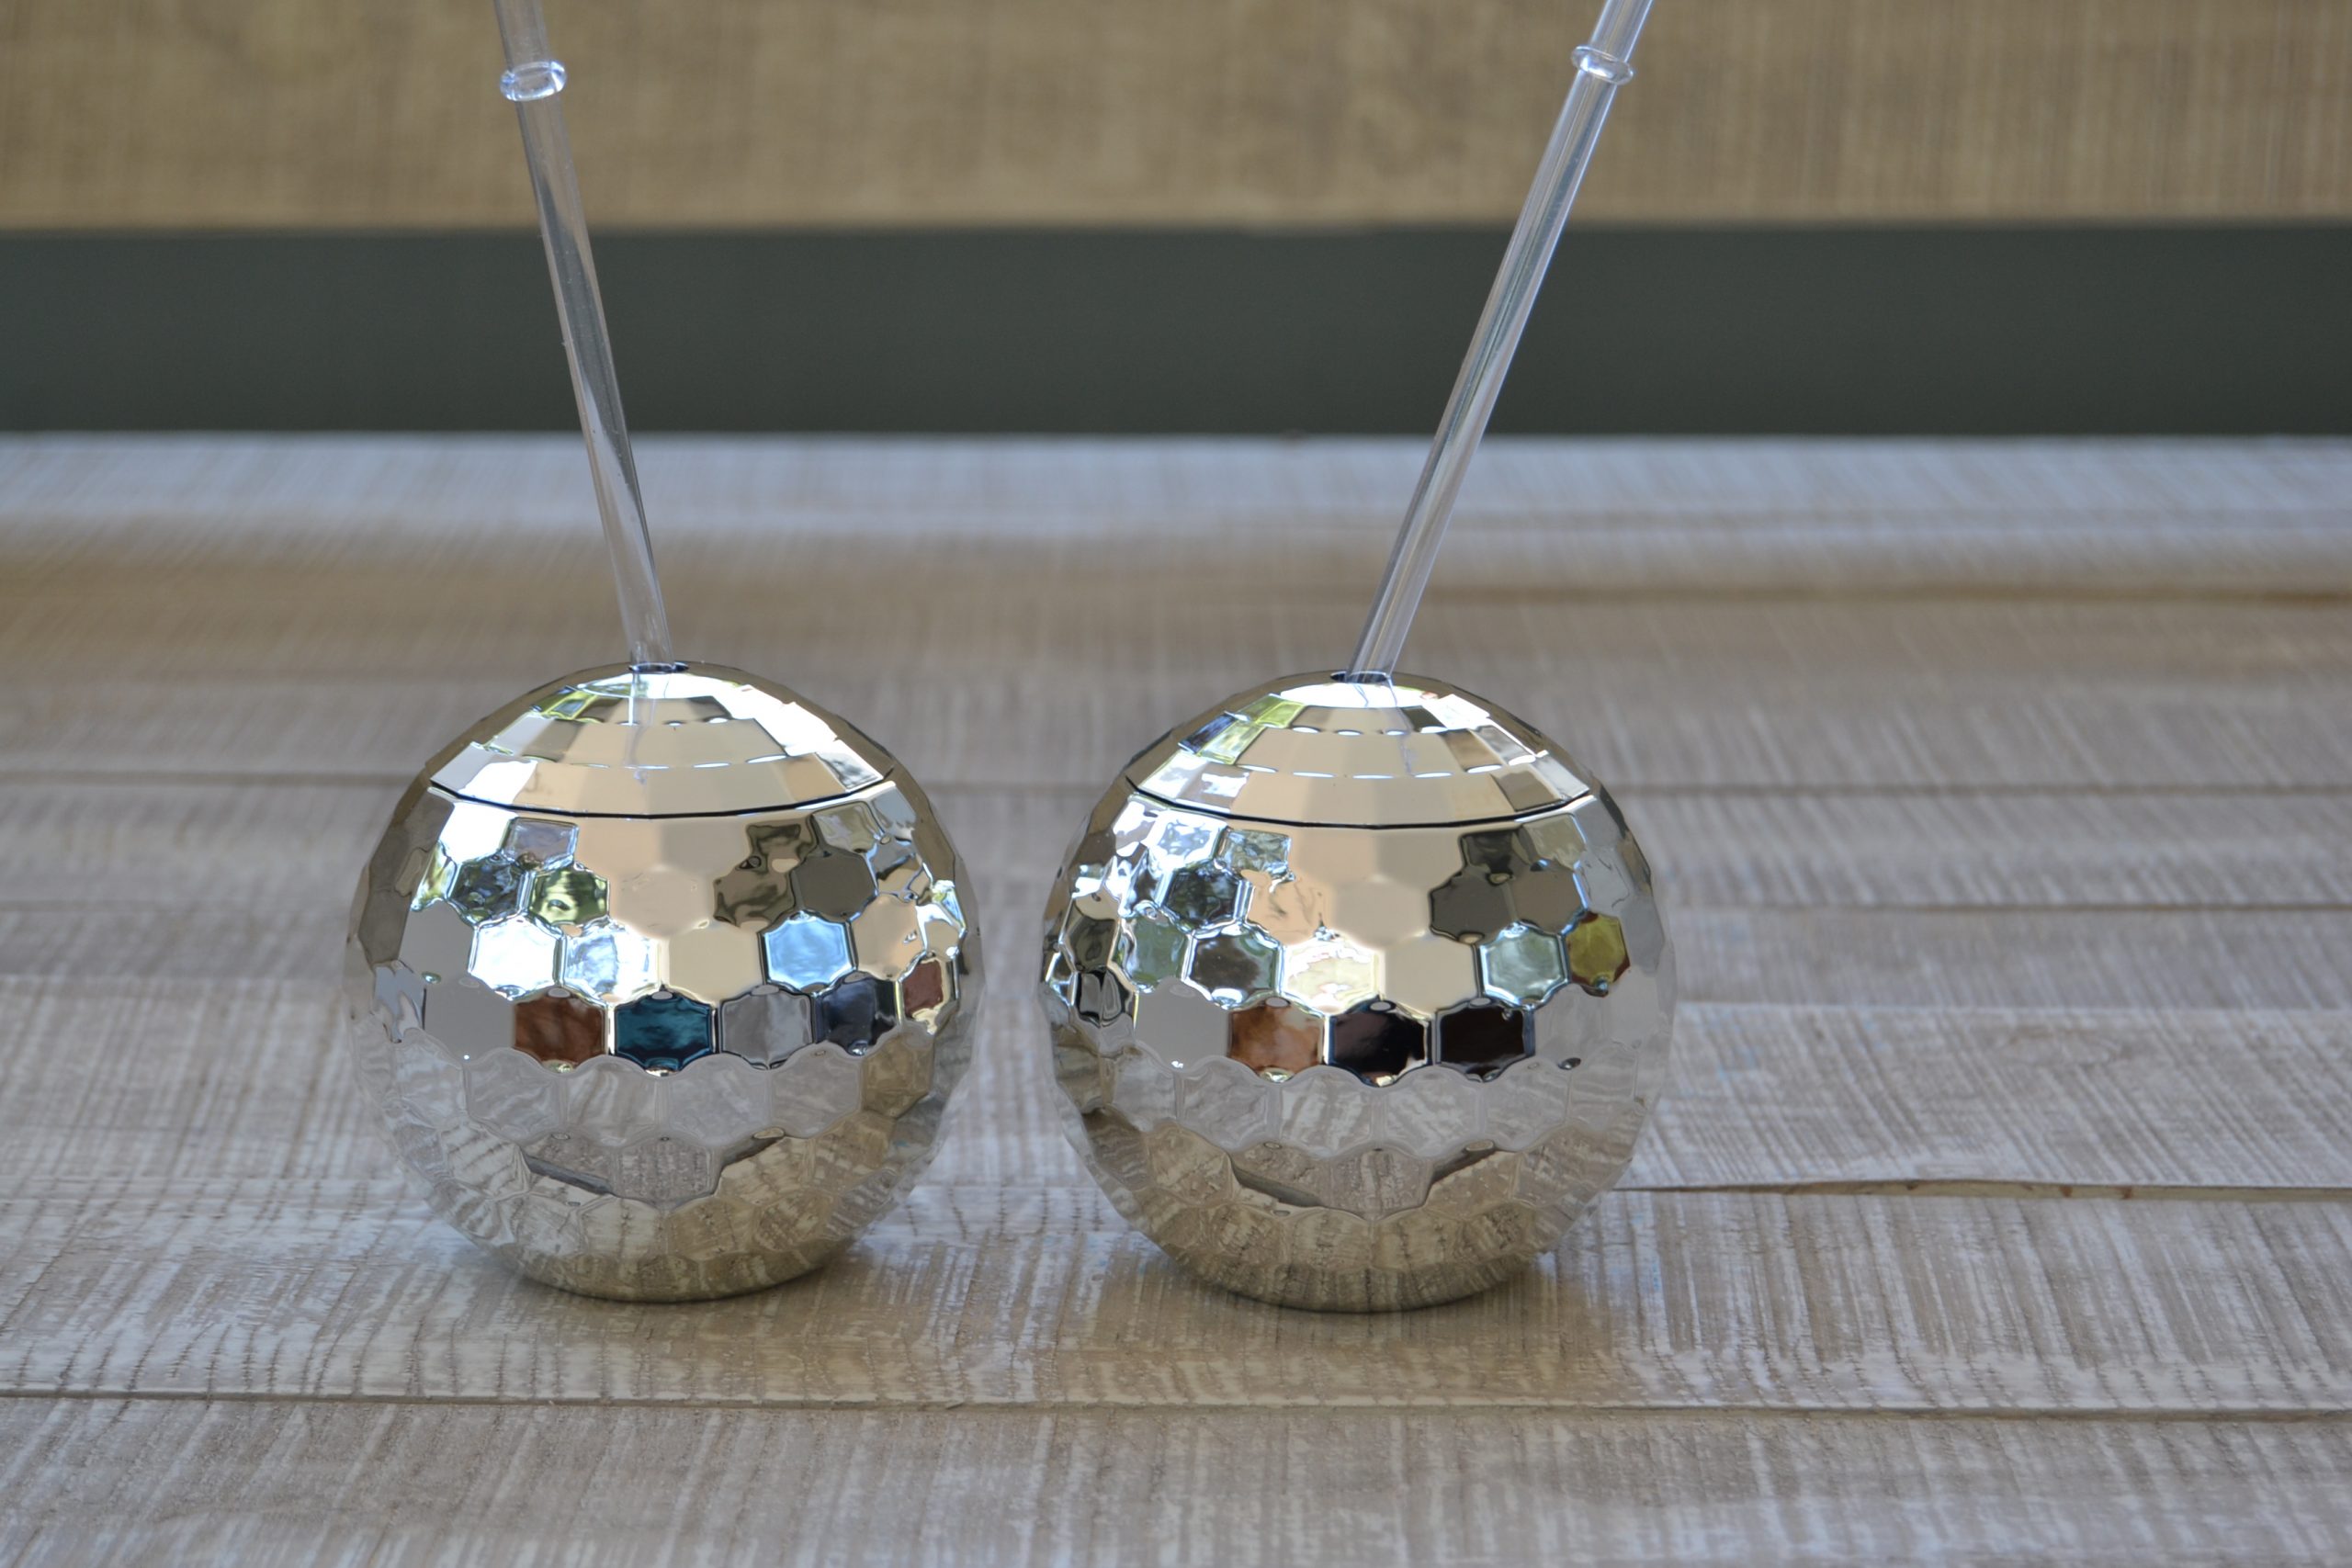 https://thearcobaleno.com/wp-content/uploads/2018/05/Valuecom-Vodka-Ciroc-Disco-BaLL-Cups-with-Straw-2-scaled.jpg